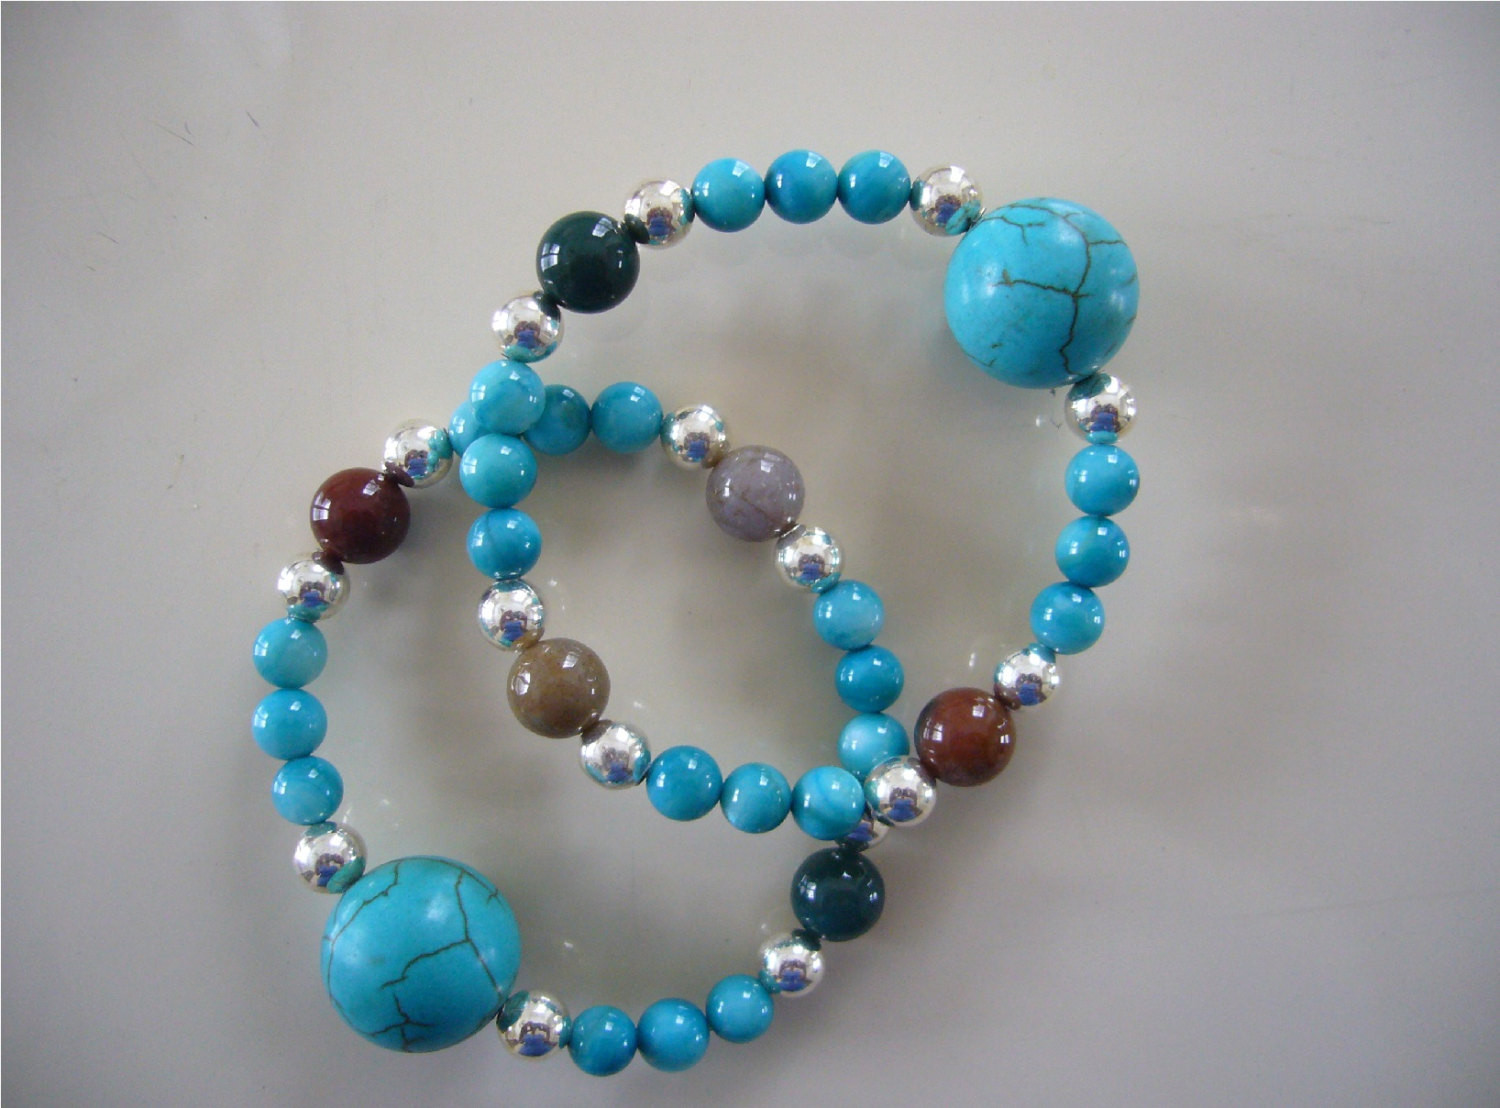 Bracelet For Motion Sickness
 Queasy Beads™ Motion Sickness Bracelets in Turquoise